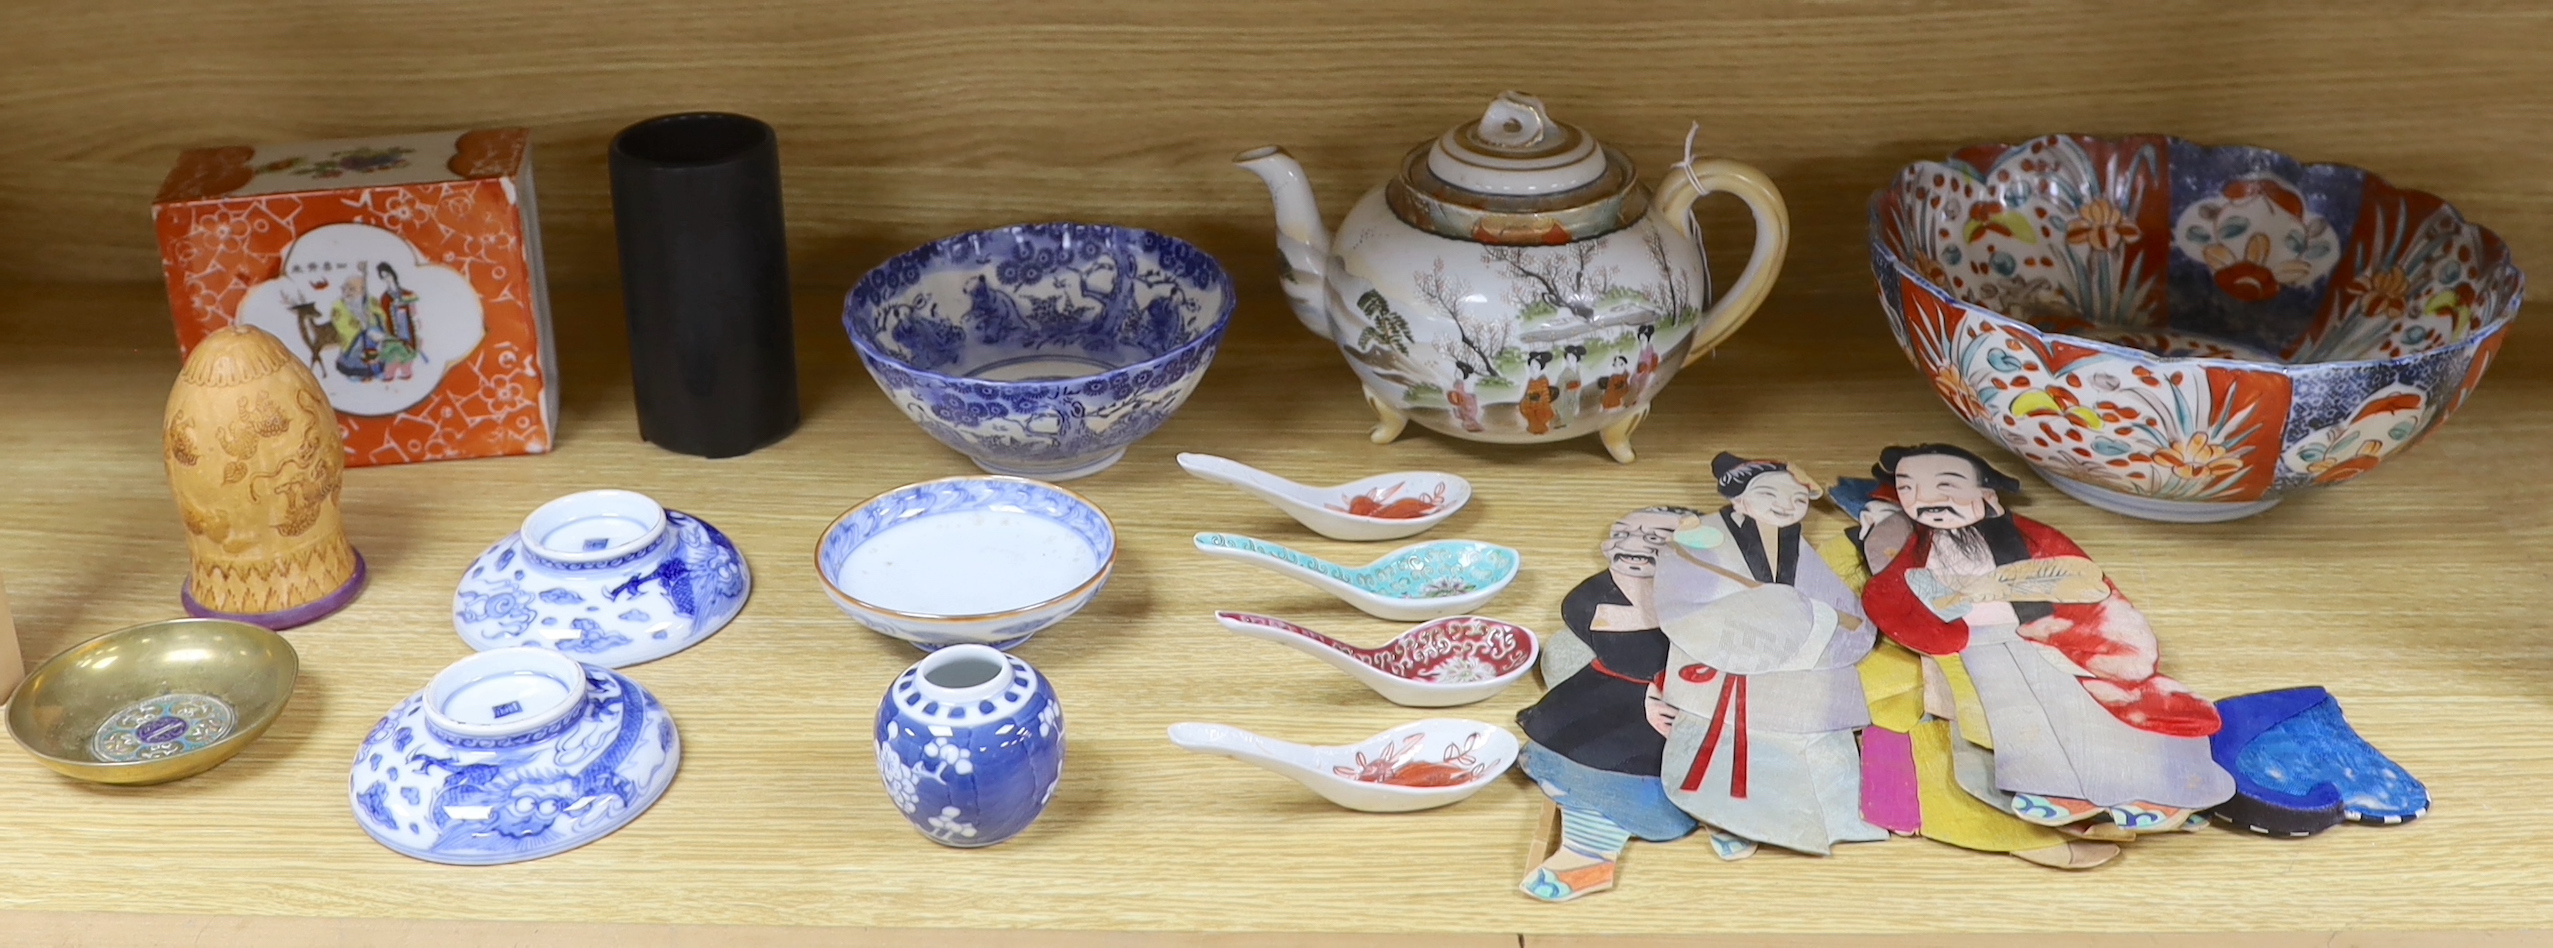 A group of Chinese and Japanese ceramics and objects, 19th/20th century, including an Imari bowl,